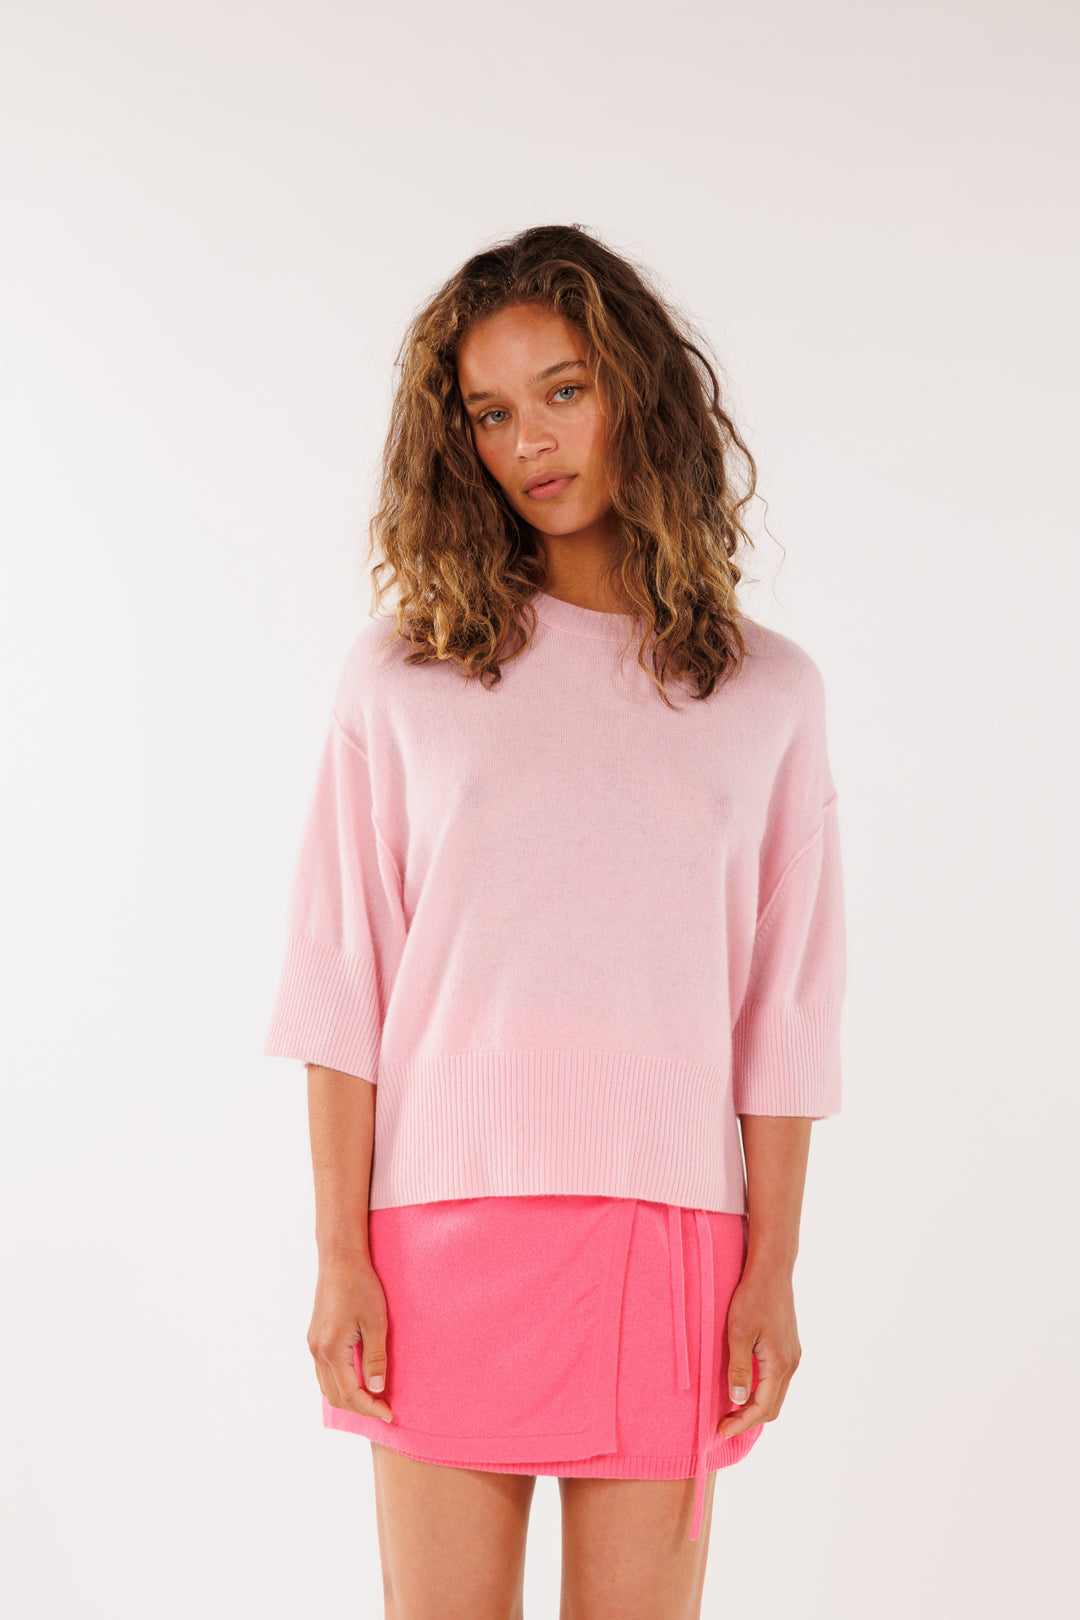 FLAMENCO TEE-CANDY FLOSS - Kingfisher Road - Online Boutique